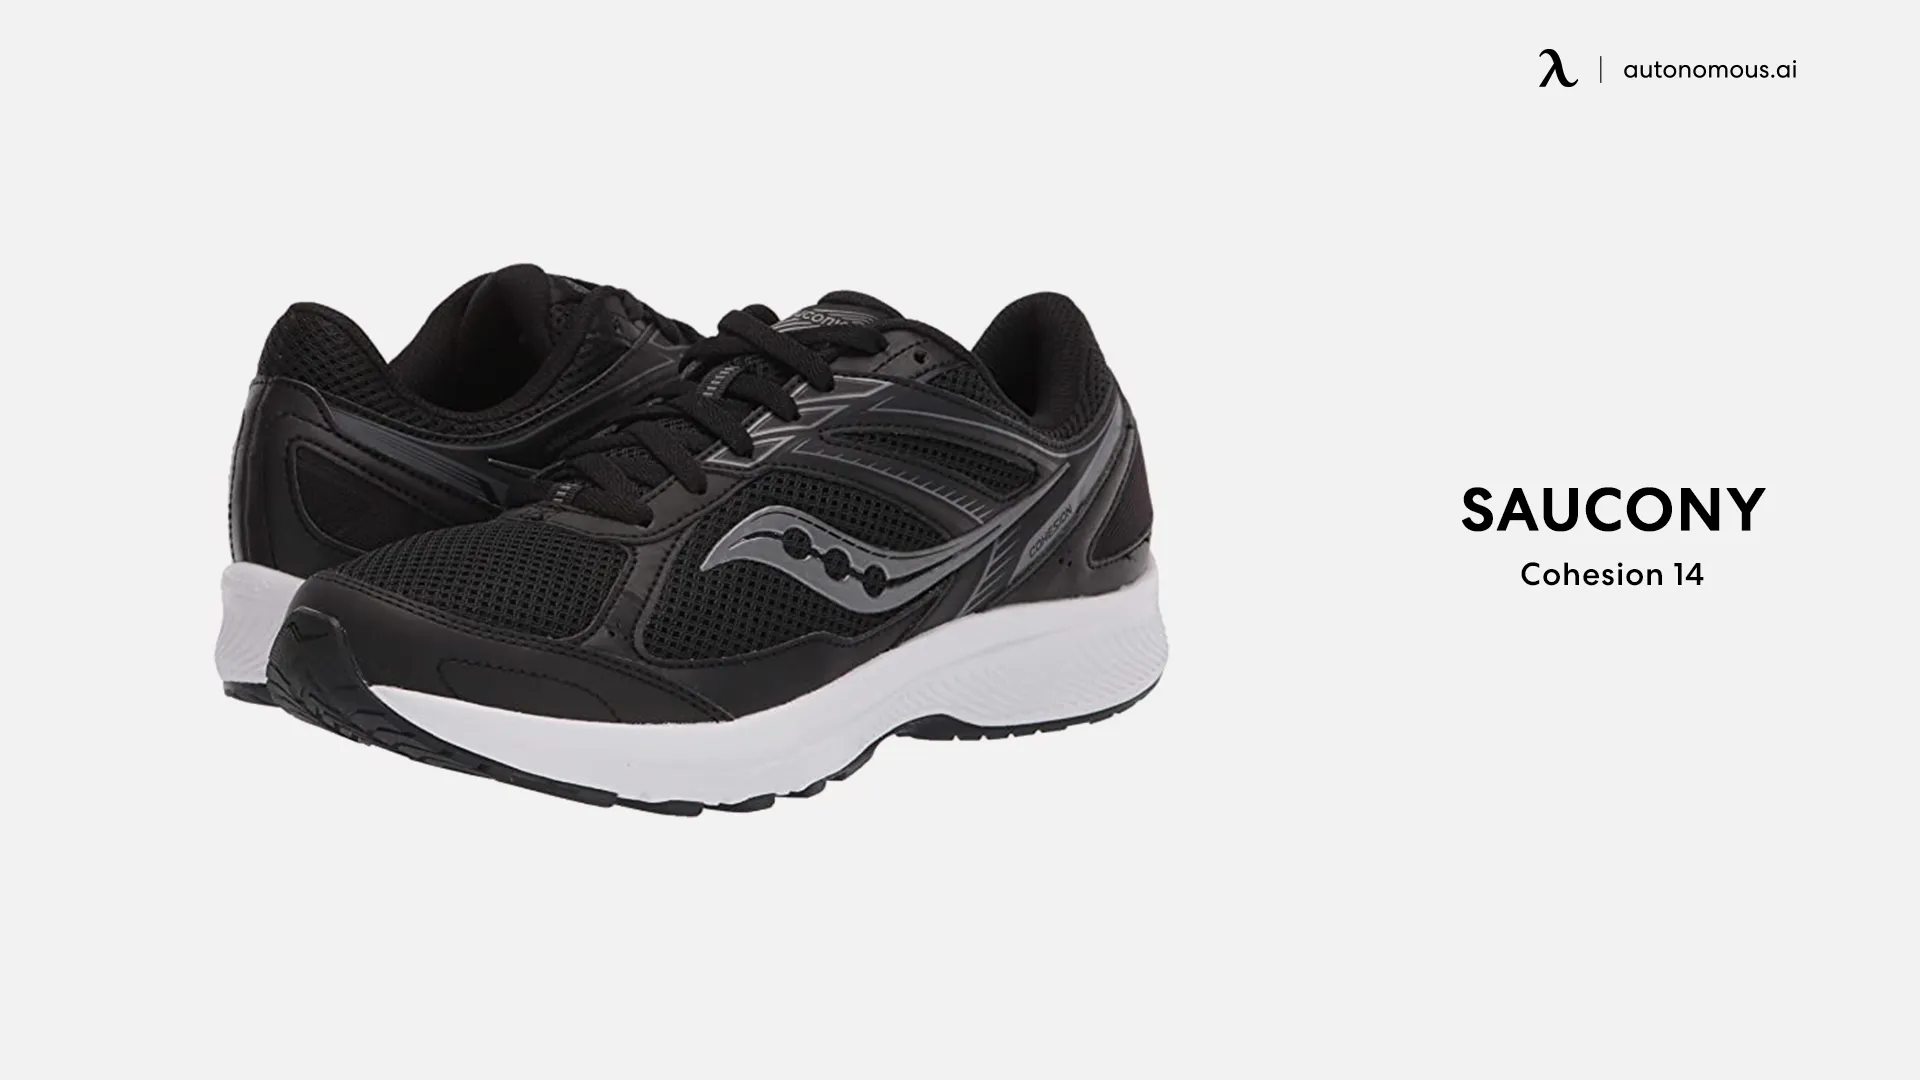 Saucony Cohesion 14 shoes for standing all day